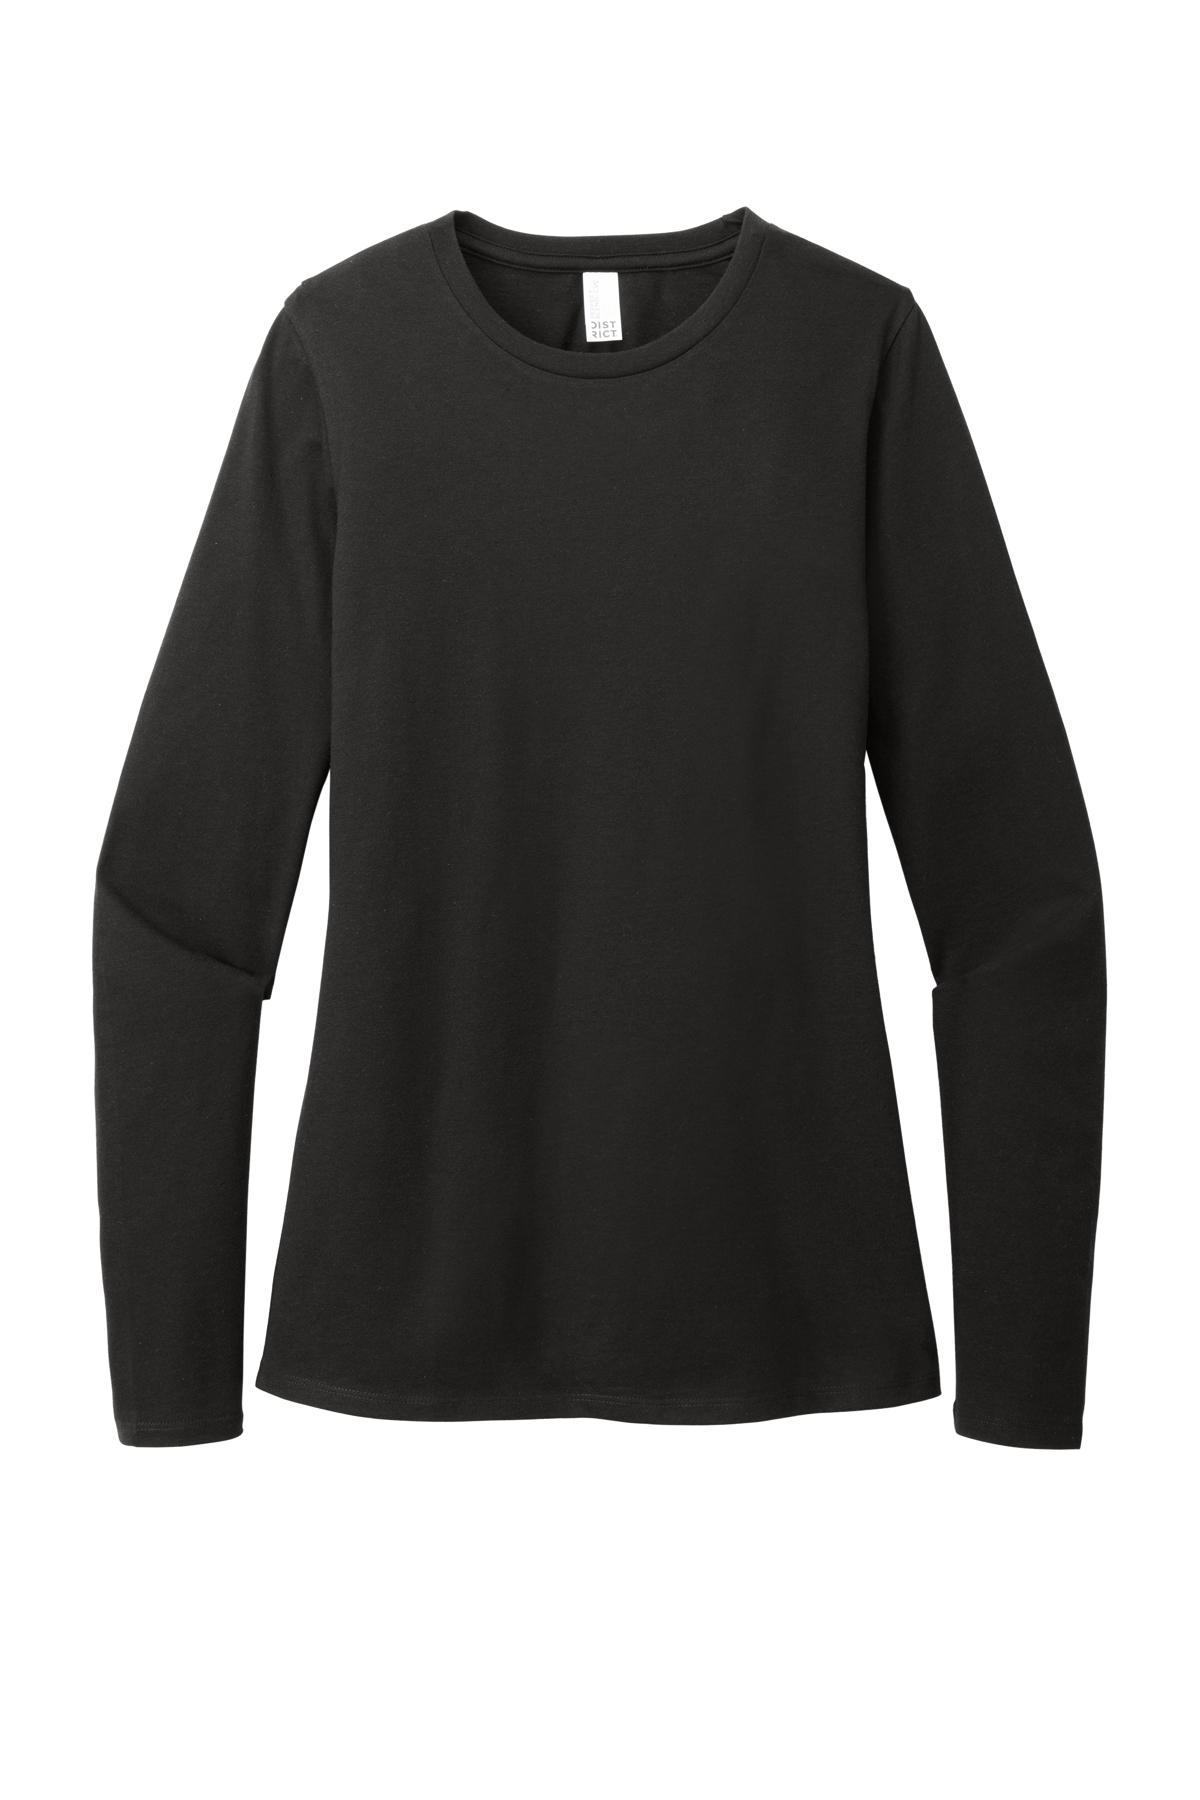 District Women's Perfect Blend CVC Long Sleeve Tee | Product | District